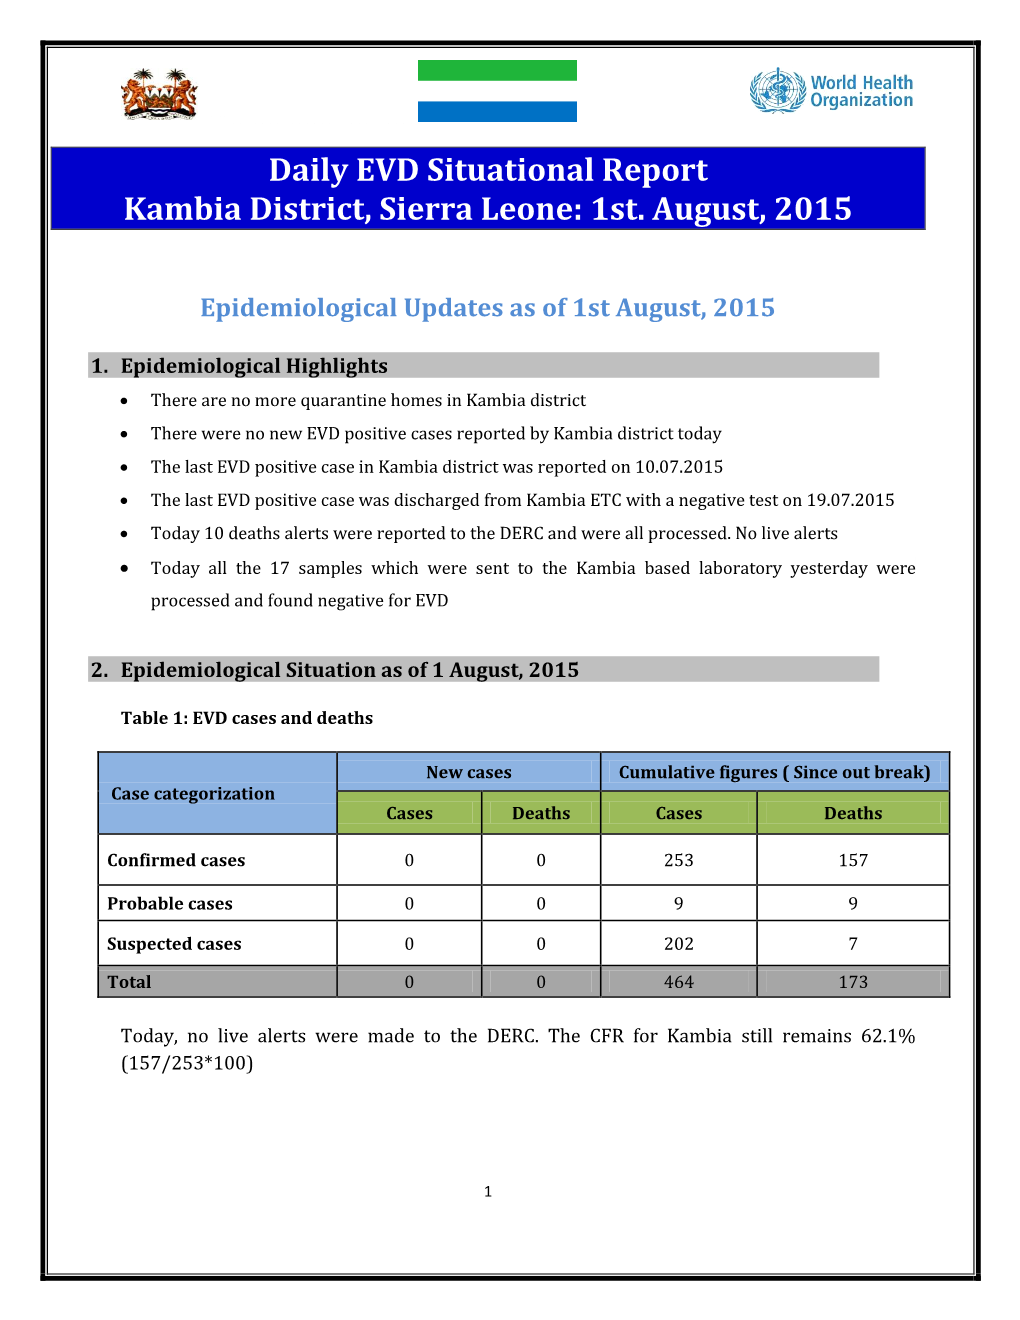 Daily EVD Situational Report Kambia District, Sierra Leone: 1St